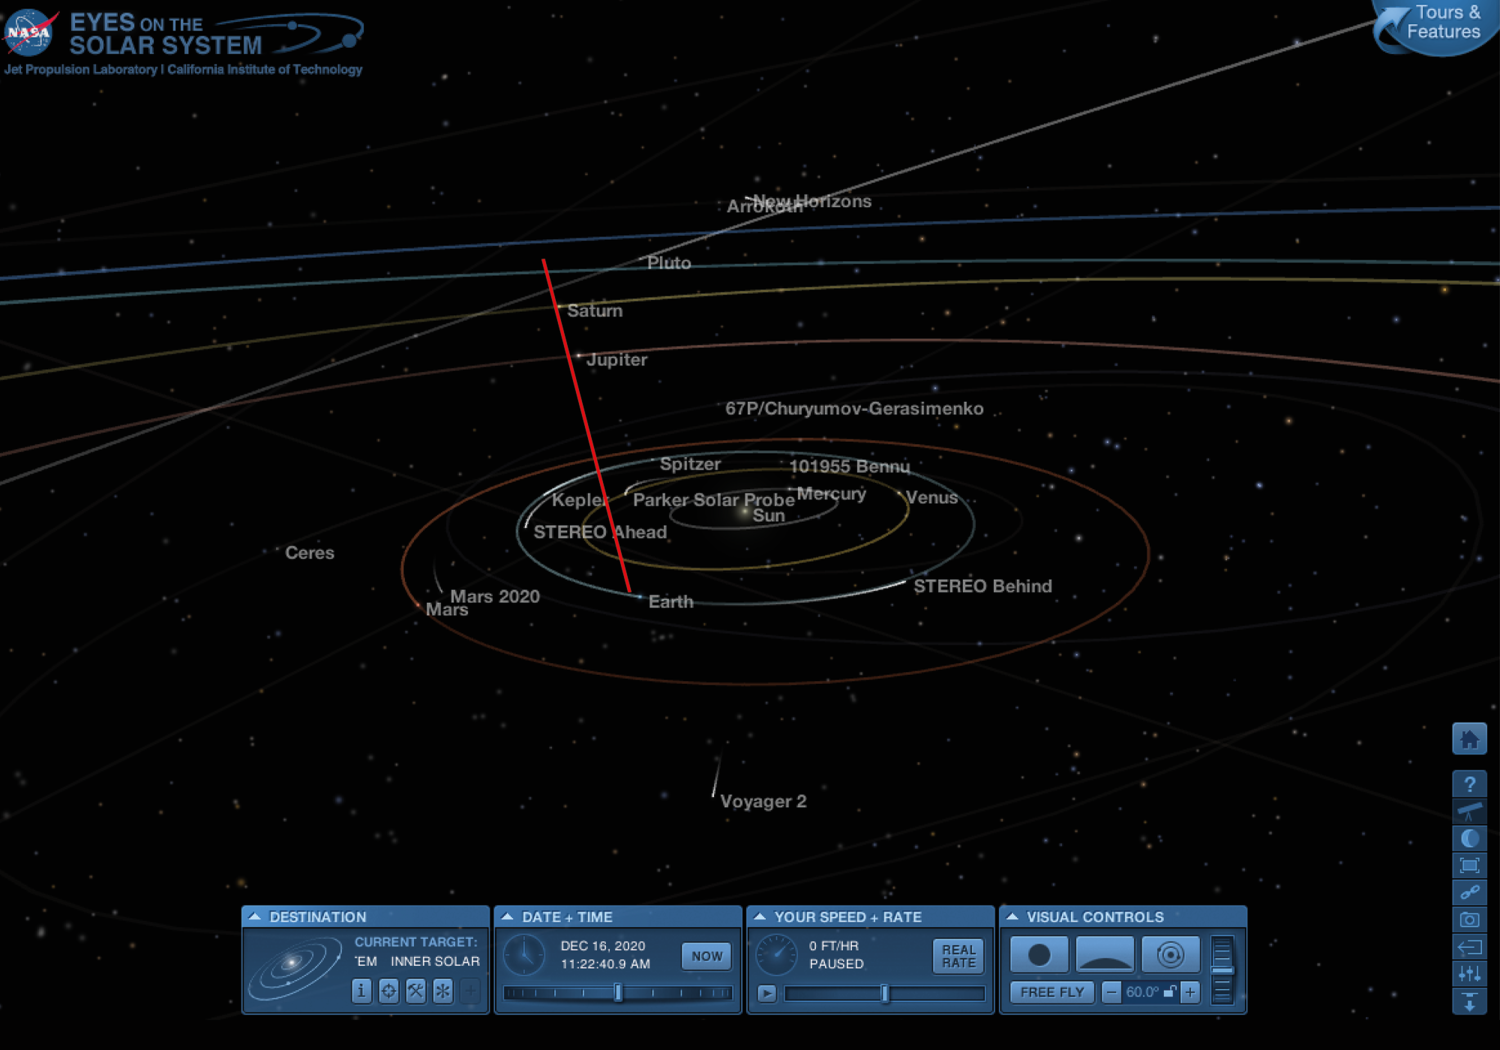 Graphic from NASA Eyes on the Solar System 